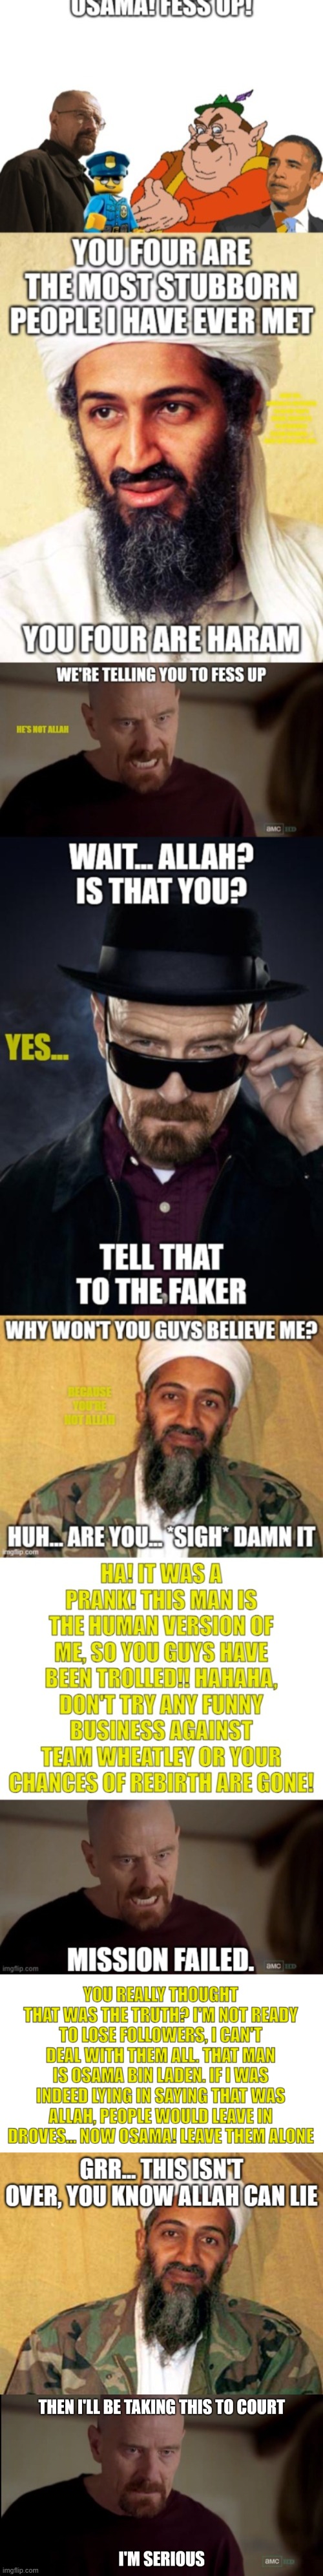 Jokes based on lies are a sin in Islam, expect another court date | made w/ Imgflip meme maker